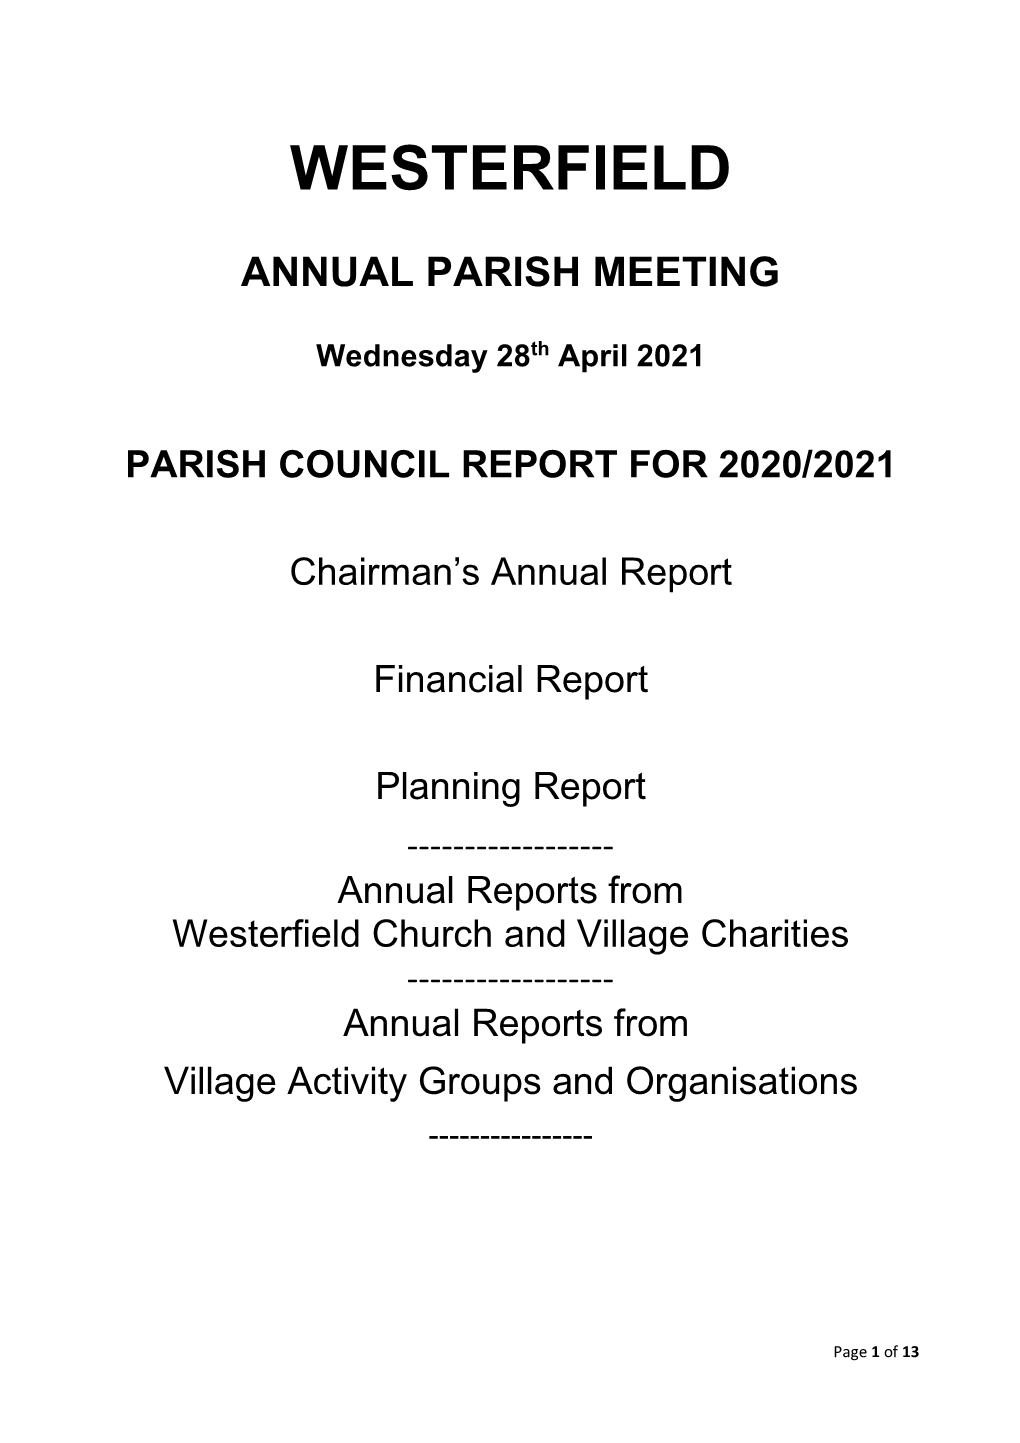 Westerfield 2021 Chairmans Report to the Annual Parish Meeting